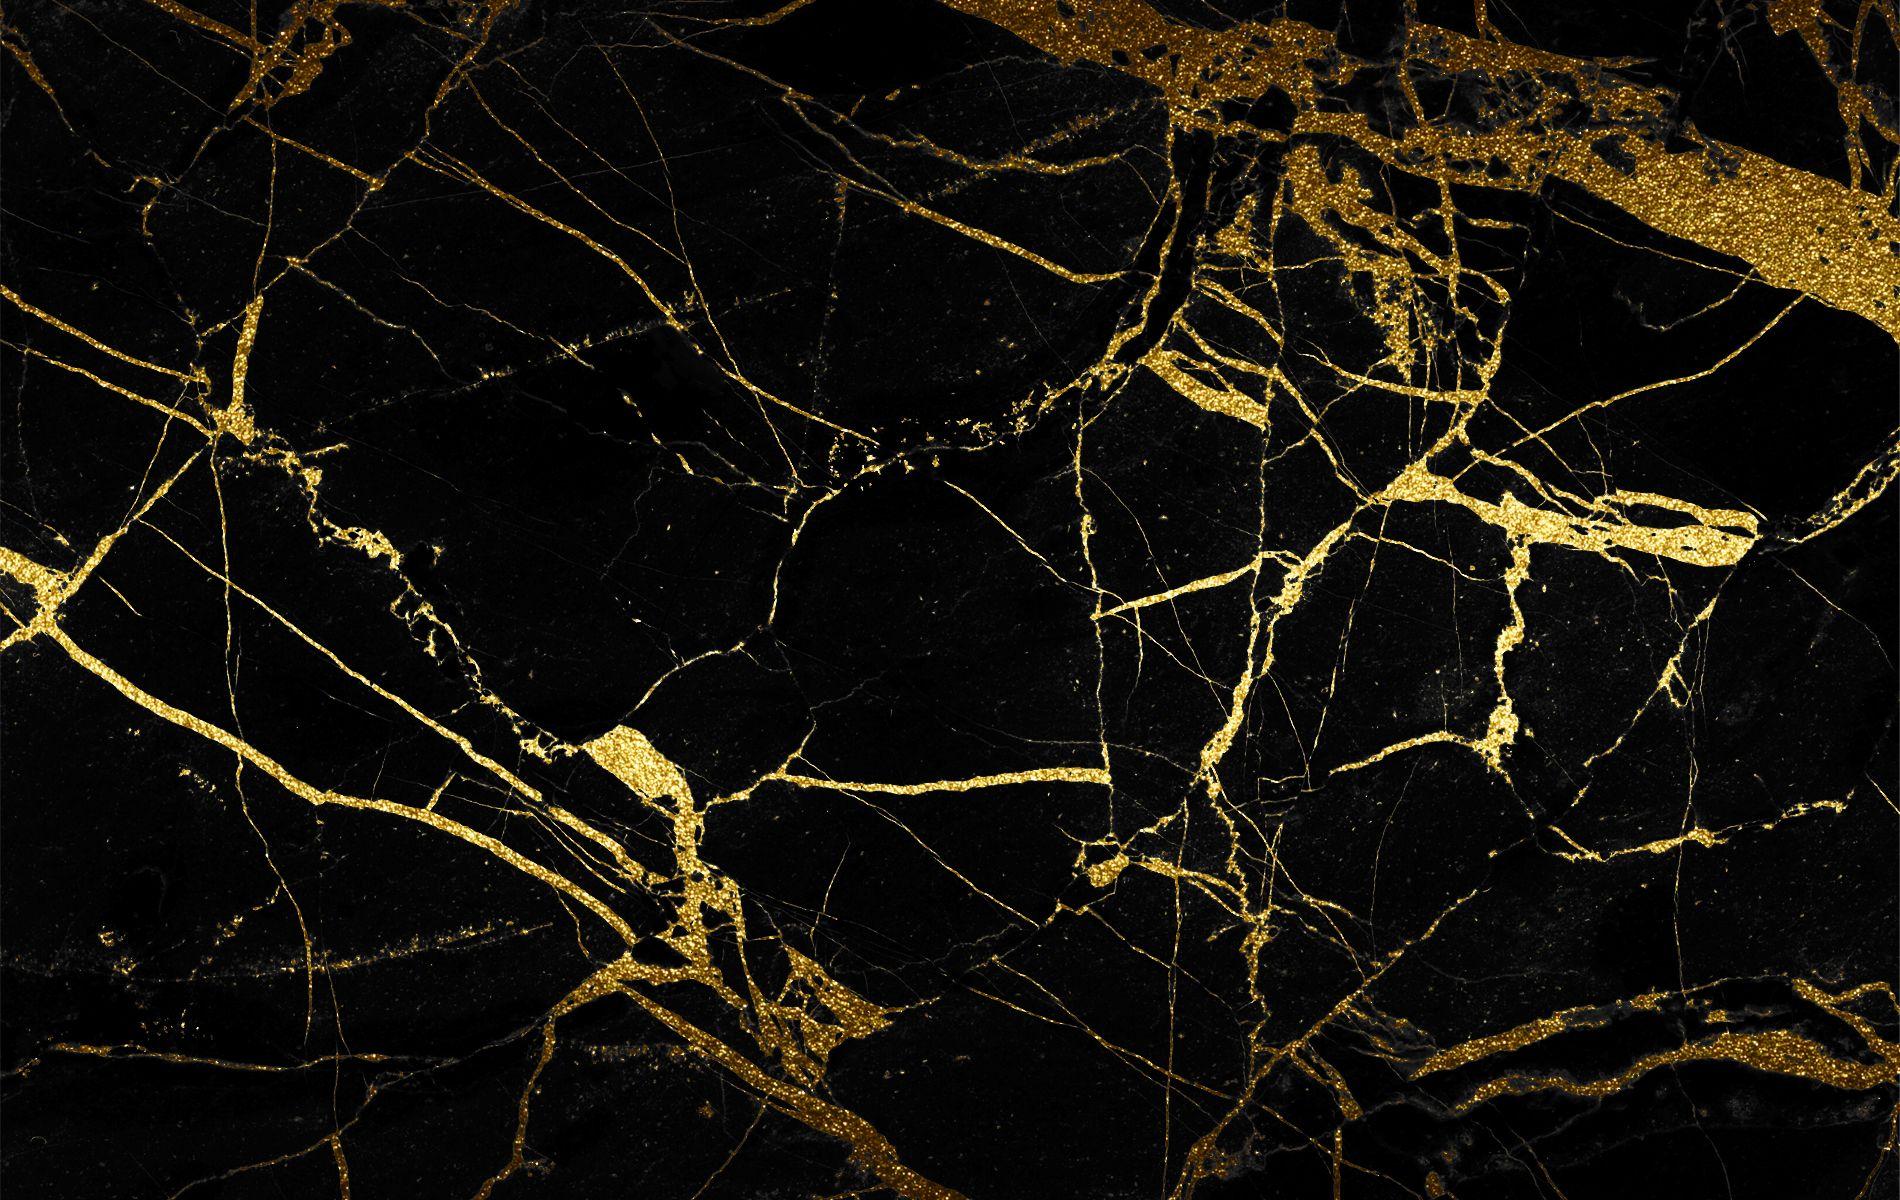 Download Black Marble Wallpaper Android 1900x1200 px 740.01 KB